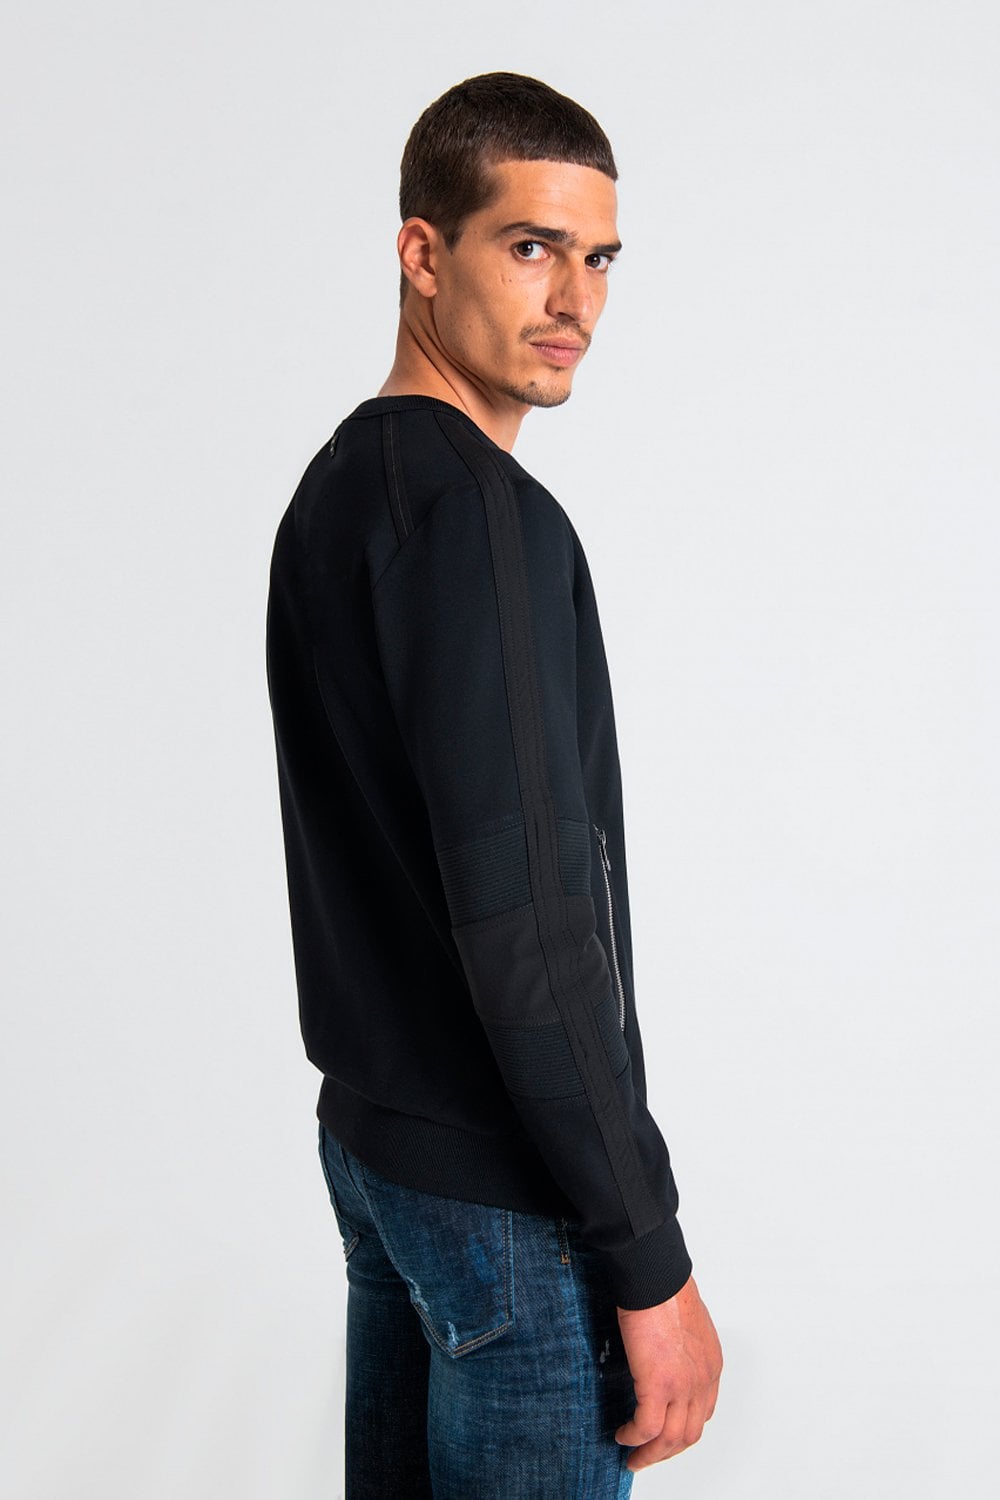 Buy the Antony Morato Slim Fit Sweatshirt in Black at Intro. Spend £50 for free UK delivery. Official stockists. We ship worldwide.